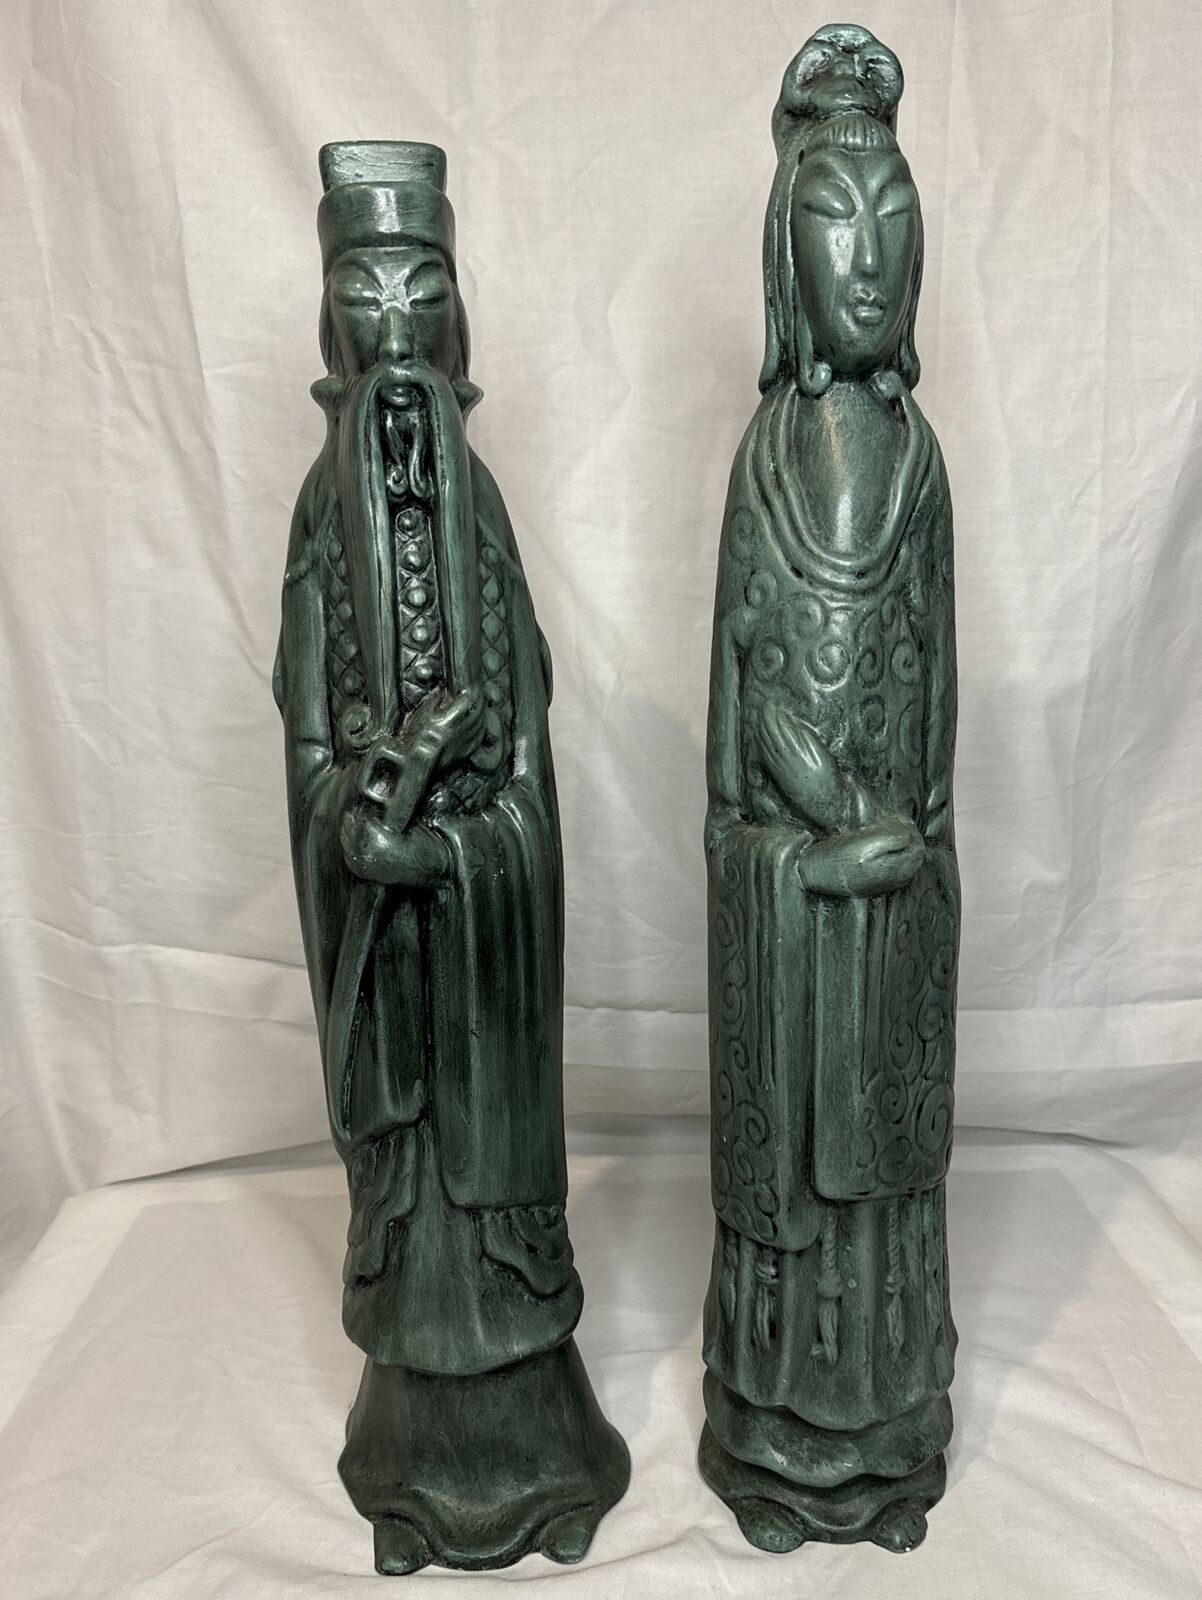 Pair Of Vintage Asian Figurines Man And Woman Tall Green Ceramic Statues 20”